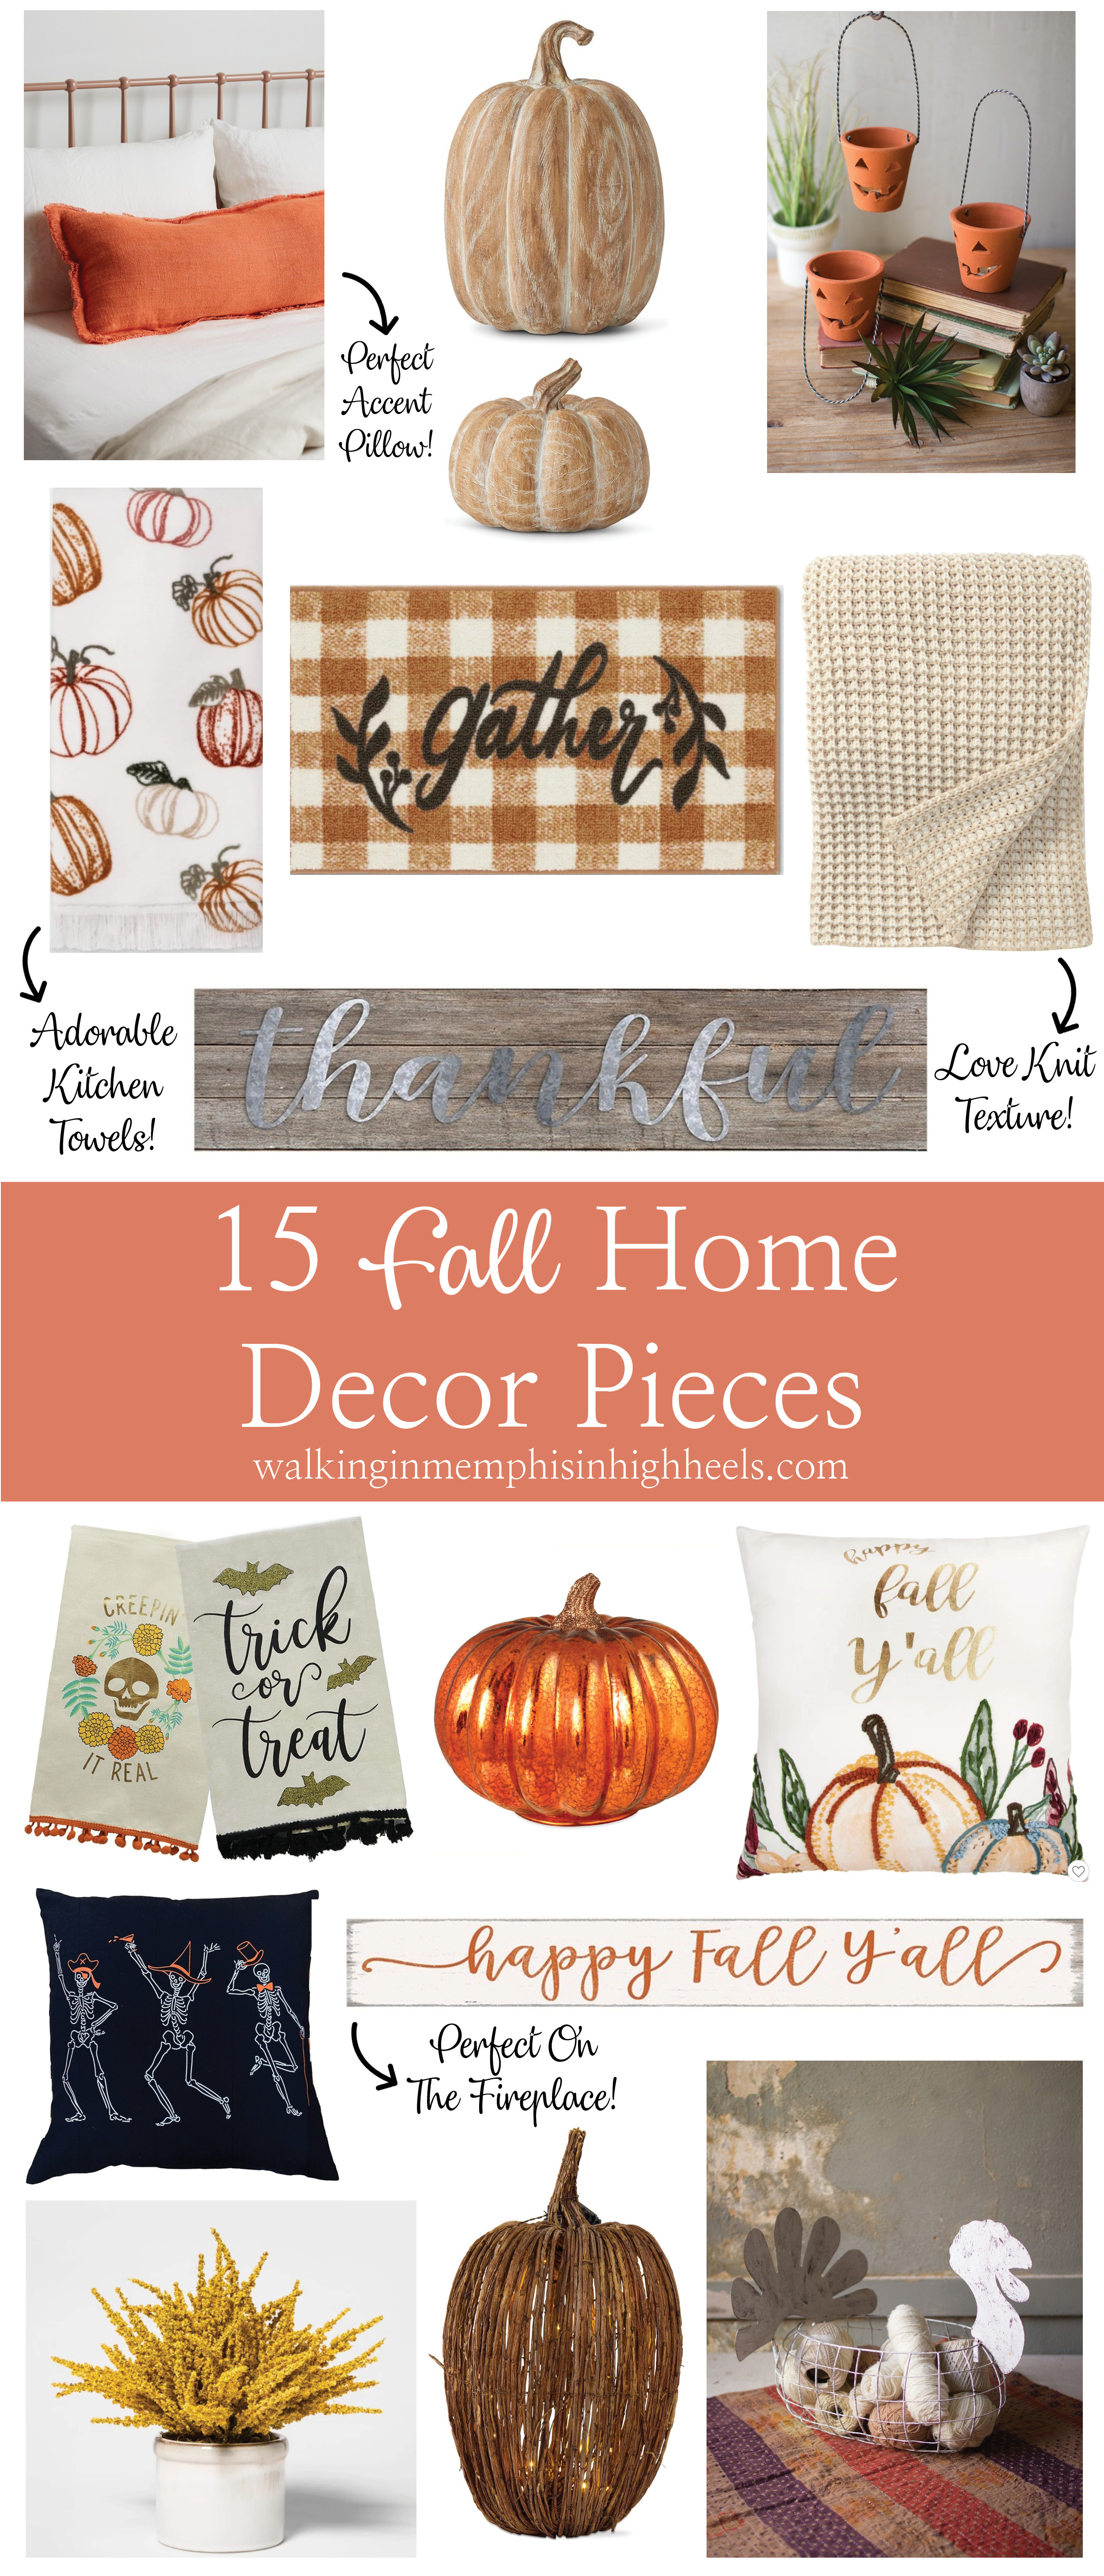 15 Fall Home Decor Ideas To Add Your House featured by top US lifestyle blog, Walking in Memphis in High Heels.